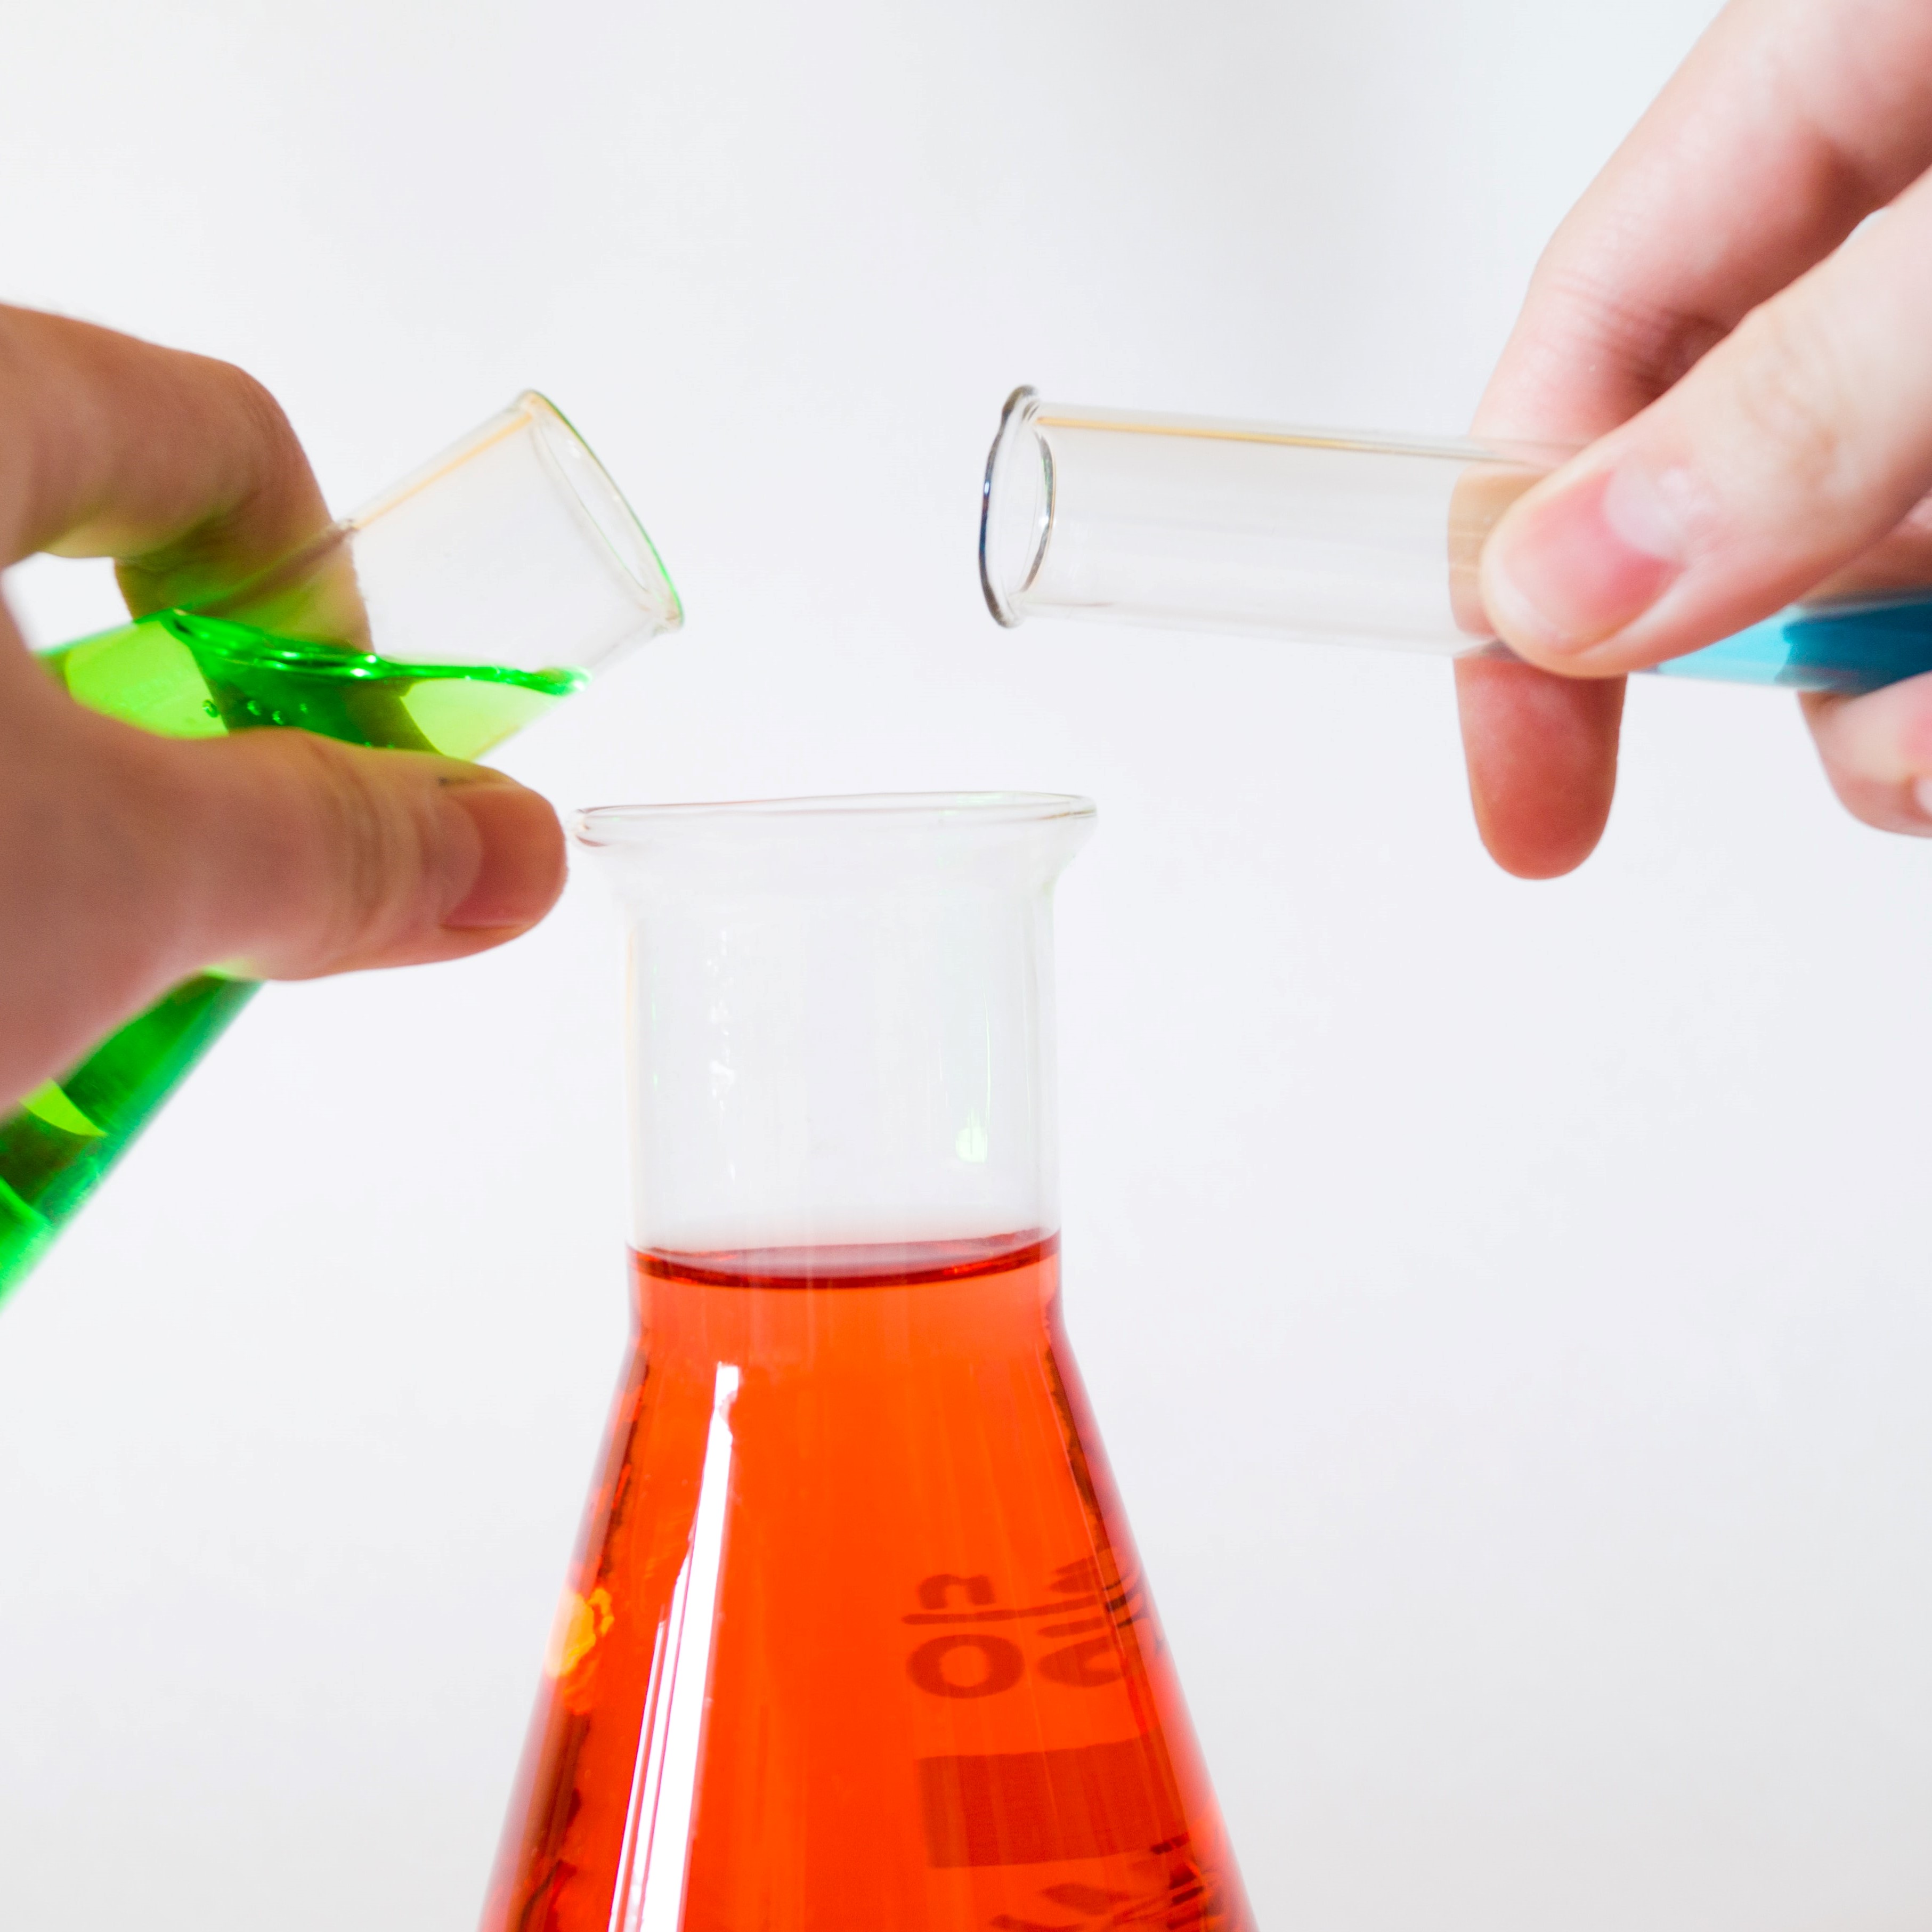 Hands pouring colored liquids into Erlenmeyer flask